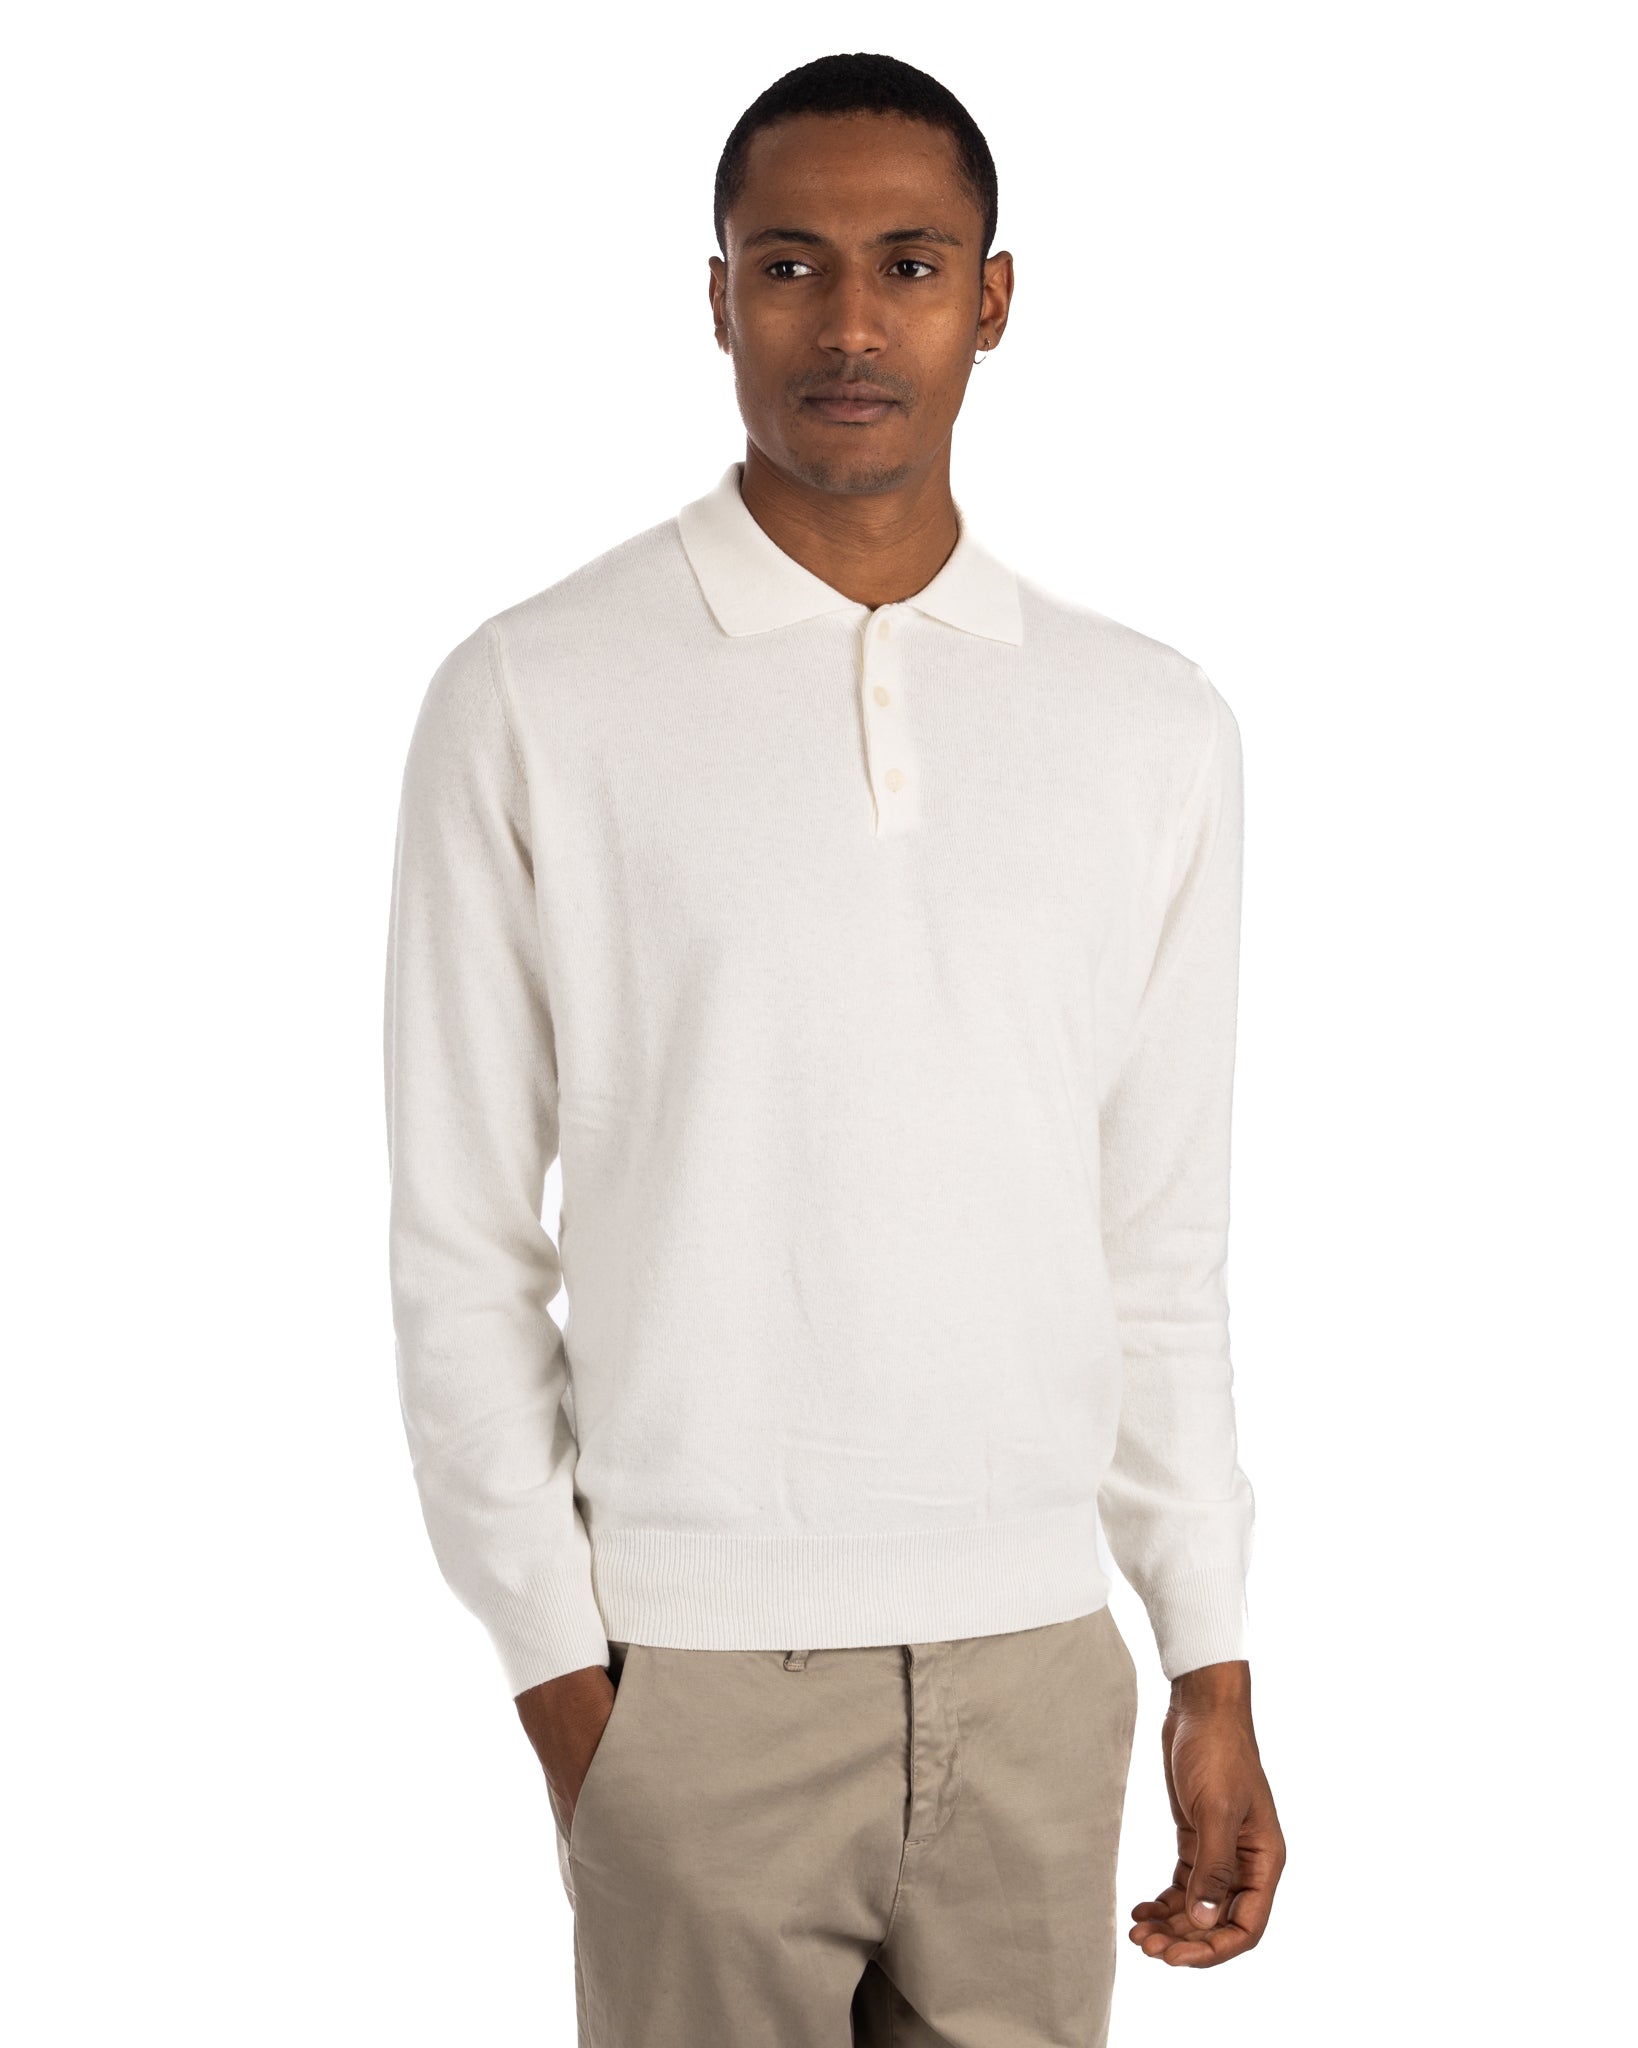 Tiger - cream polo shirt in cashmere blend